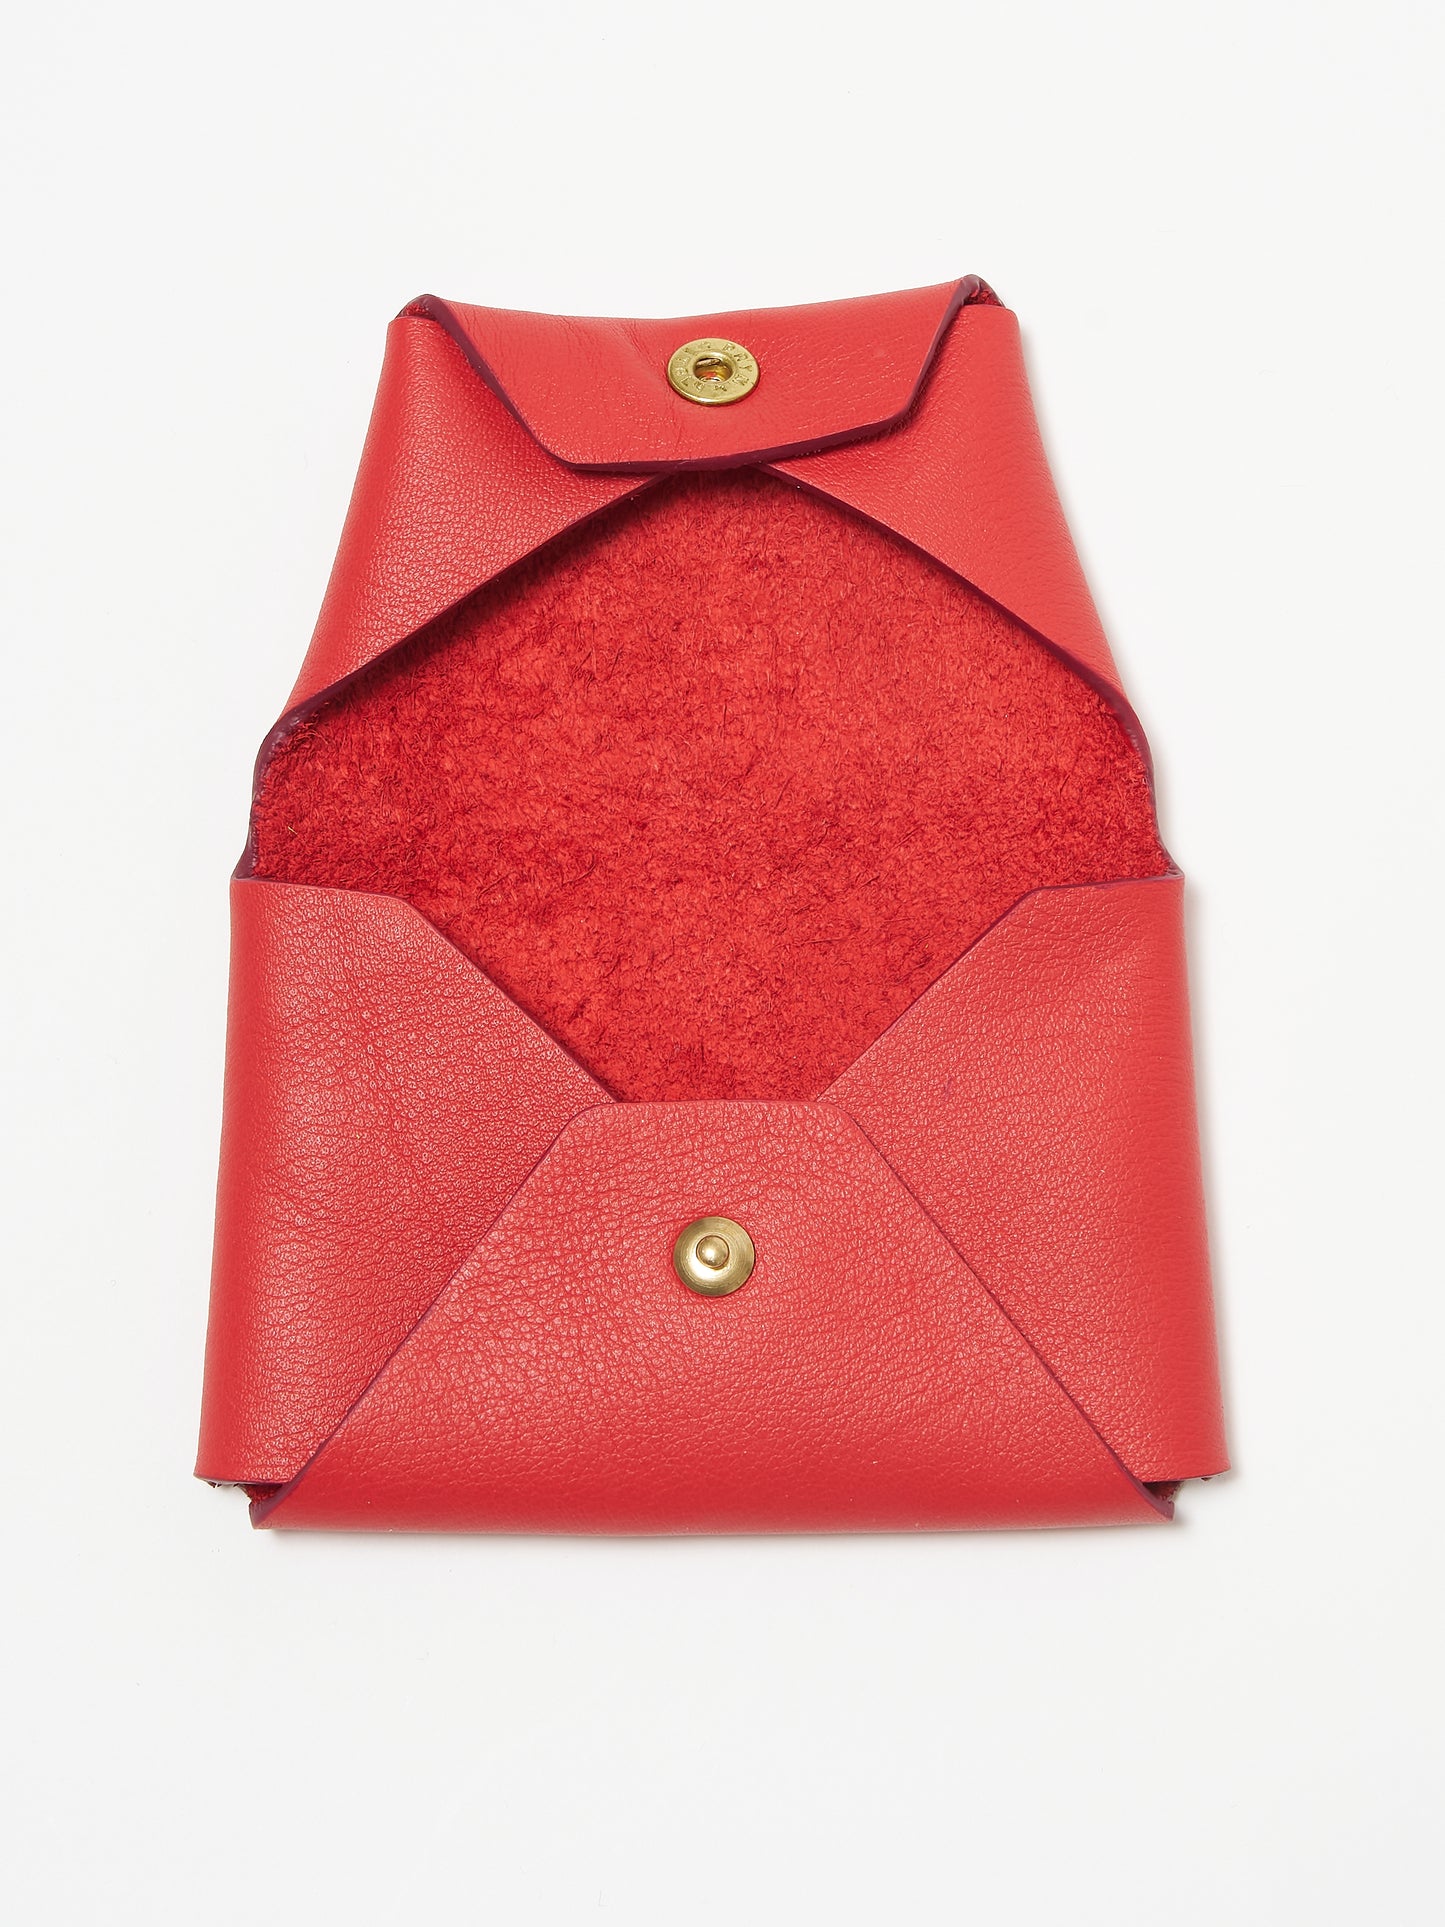 Coin Case (Red)